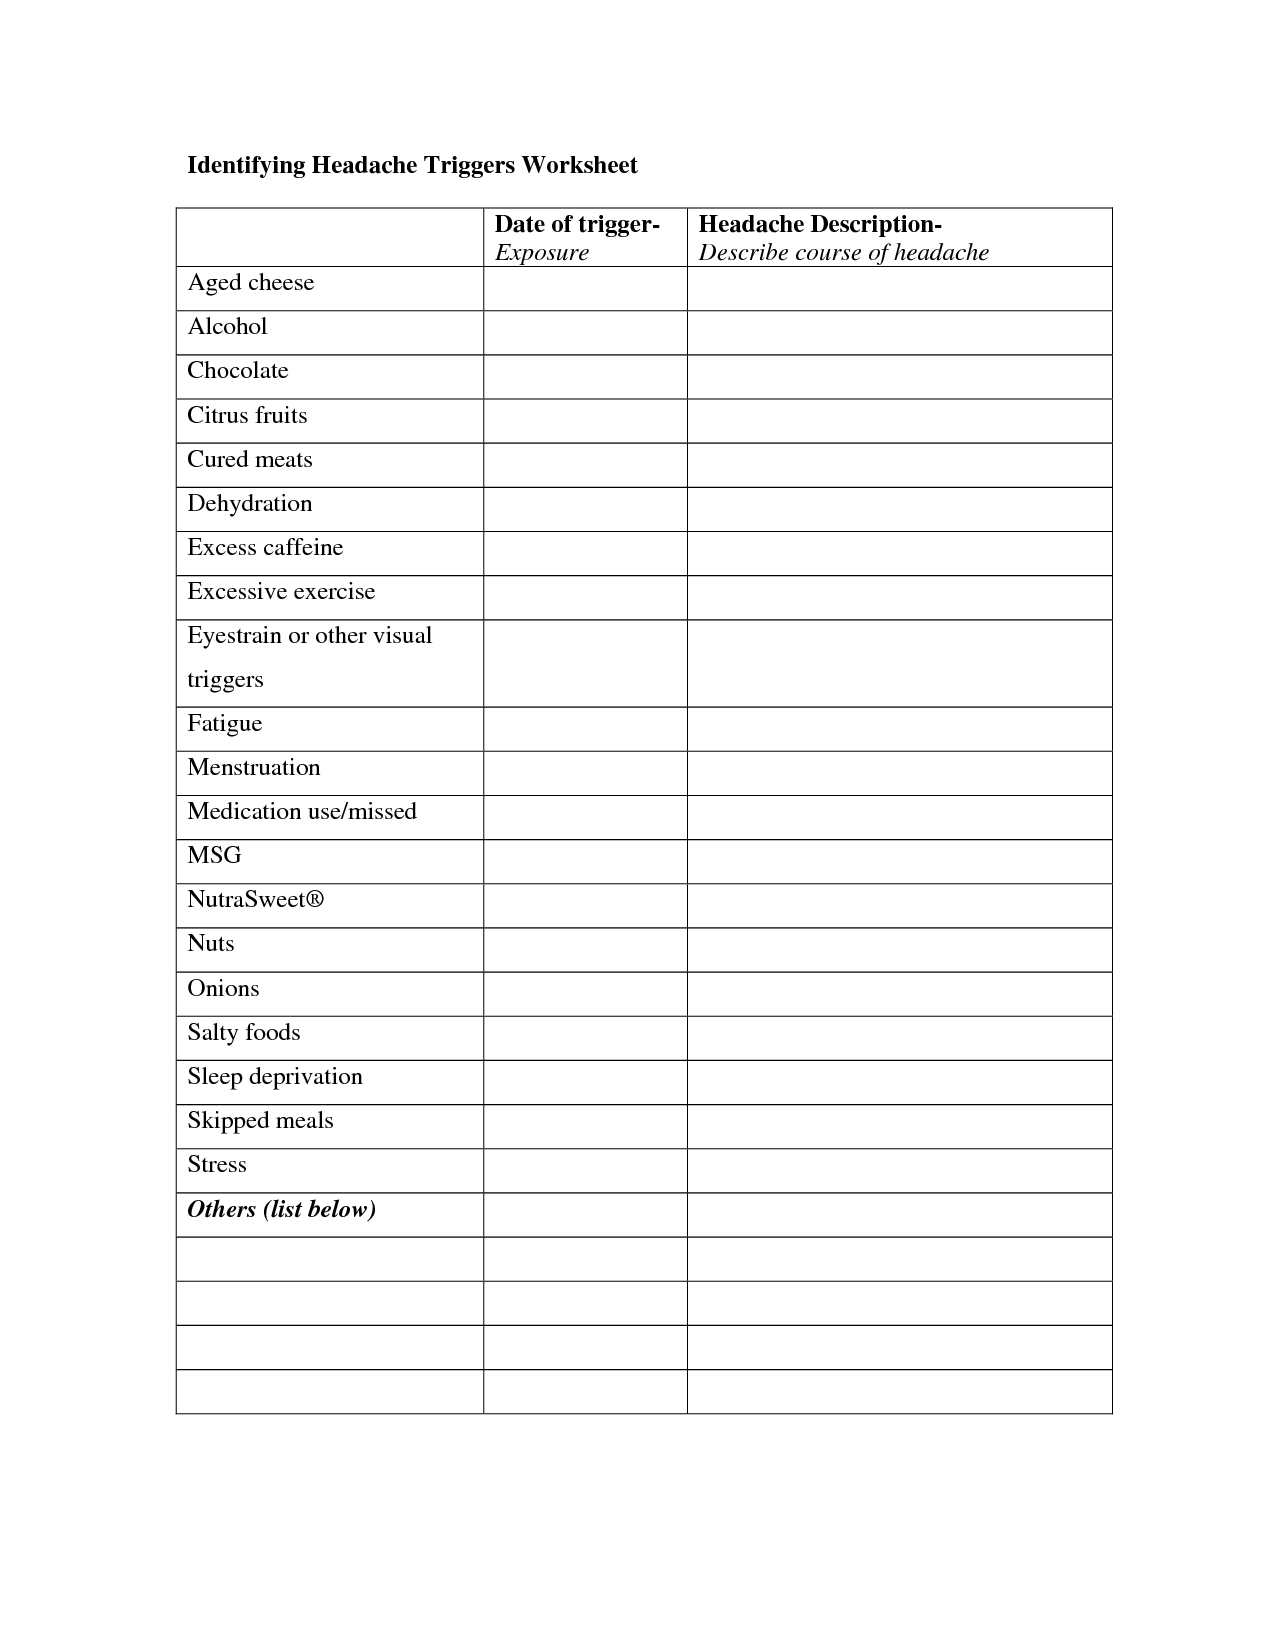 18 Best Images of Recovery And Relapse Worksheet - Relapse Prevention